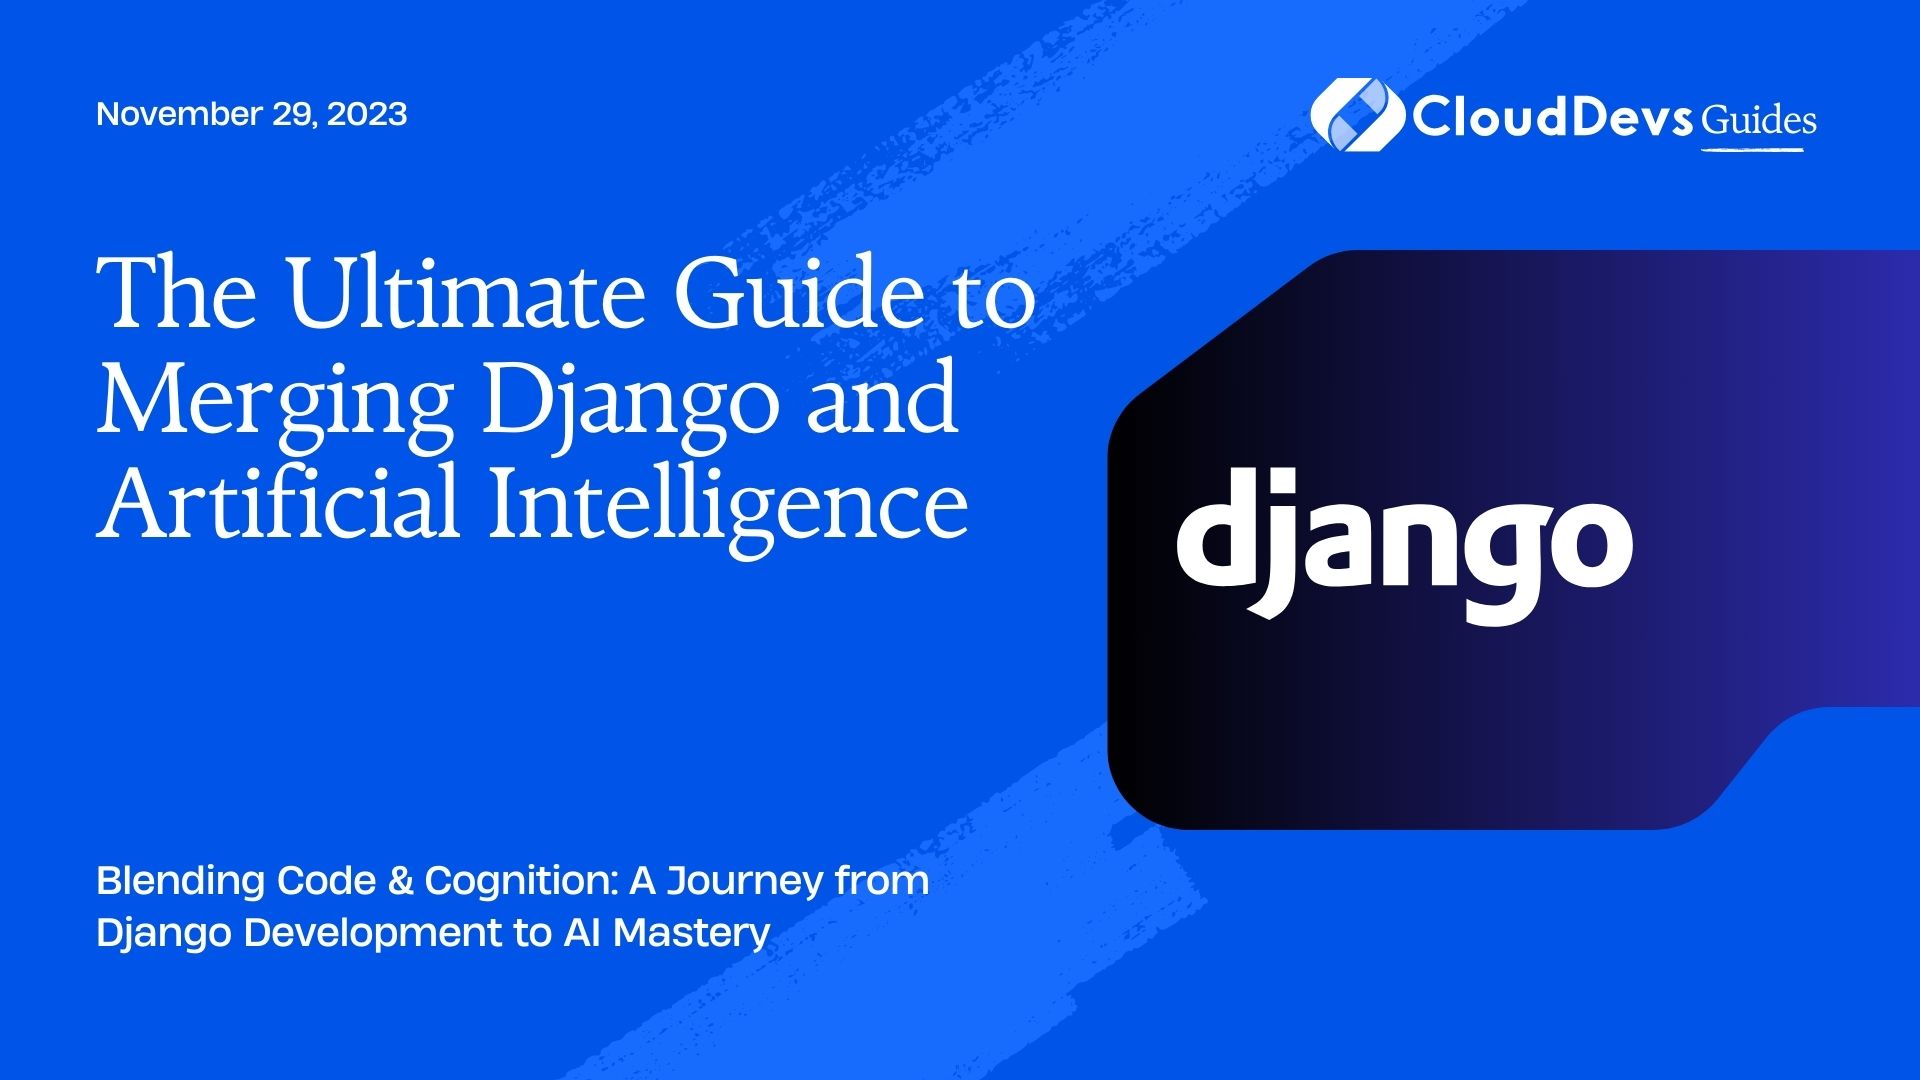 The Ultimate Guide to Merging Django and Artificial Intelligence